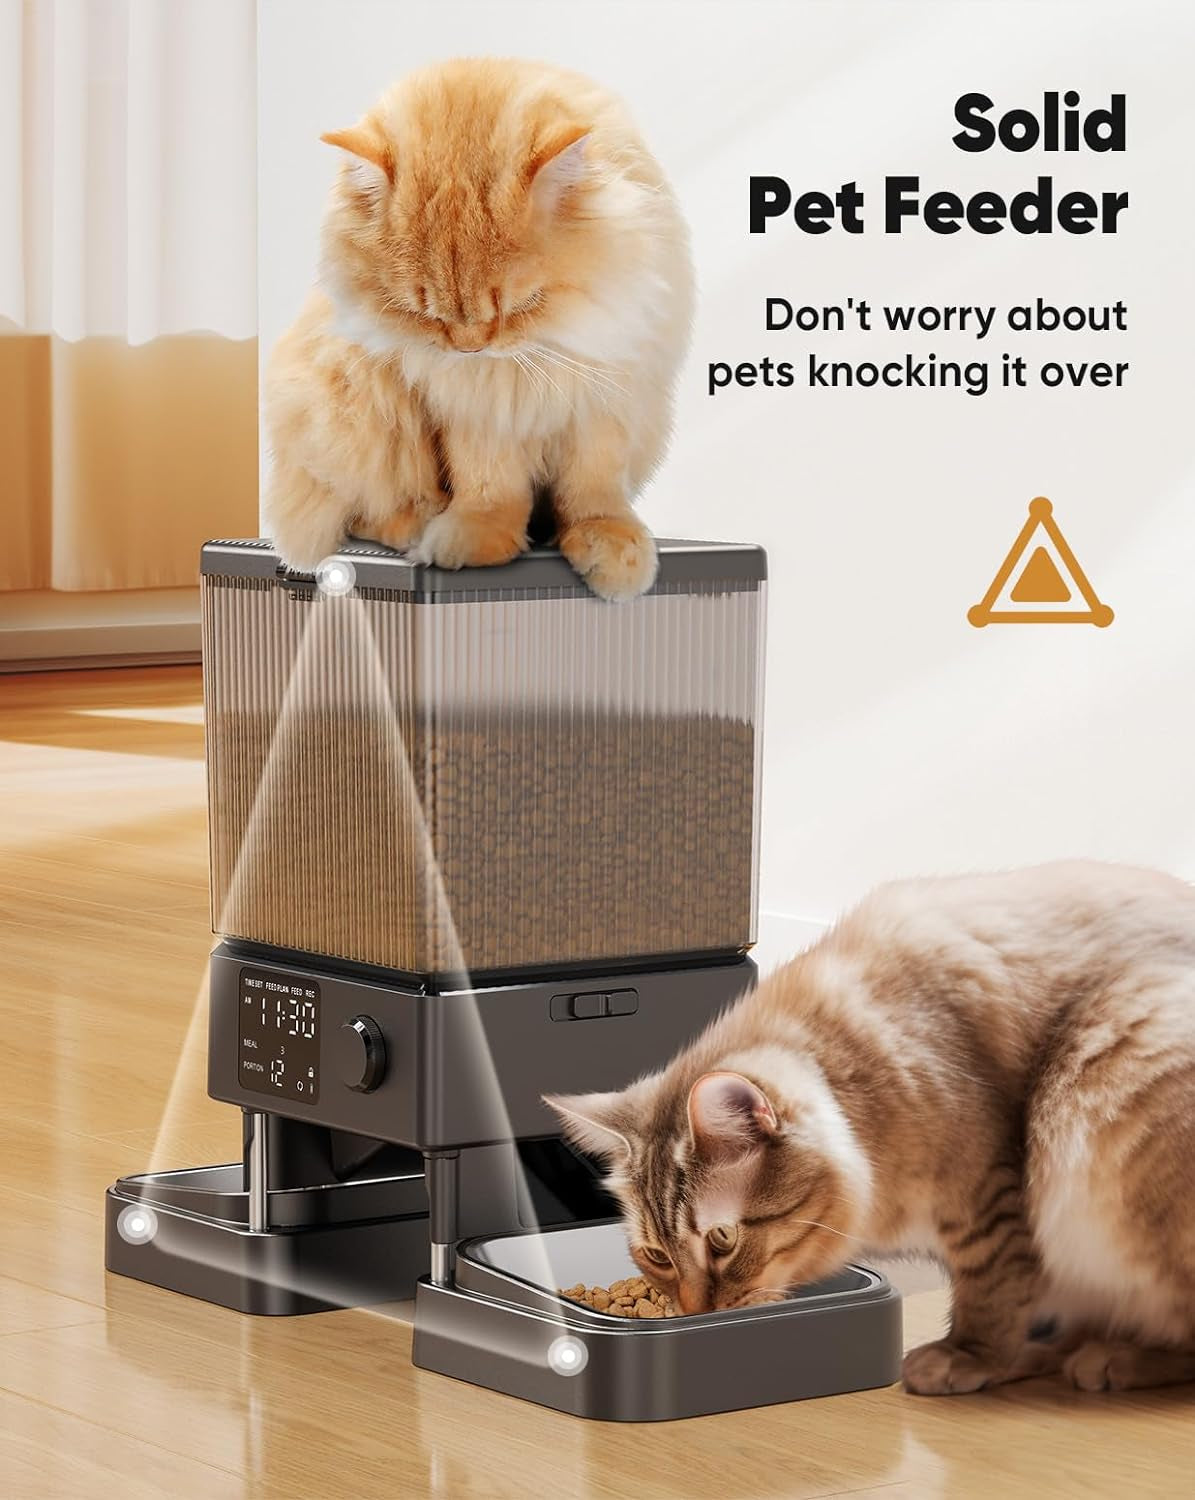 Automatic Cat Feeder for 2 Cats, 20 Cups/5L Automatic Cat Food Dispenser for Small Pets Indoor, Timed Cat Feeder for Dry Food